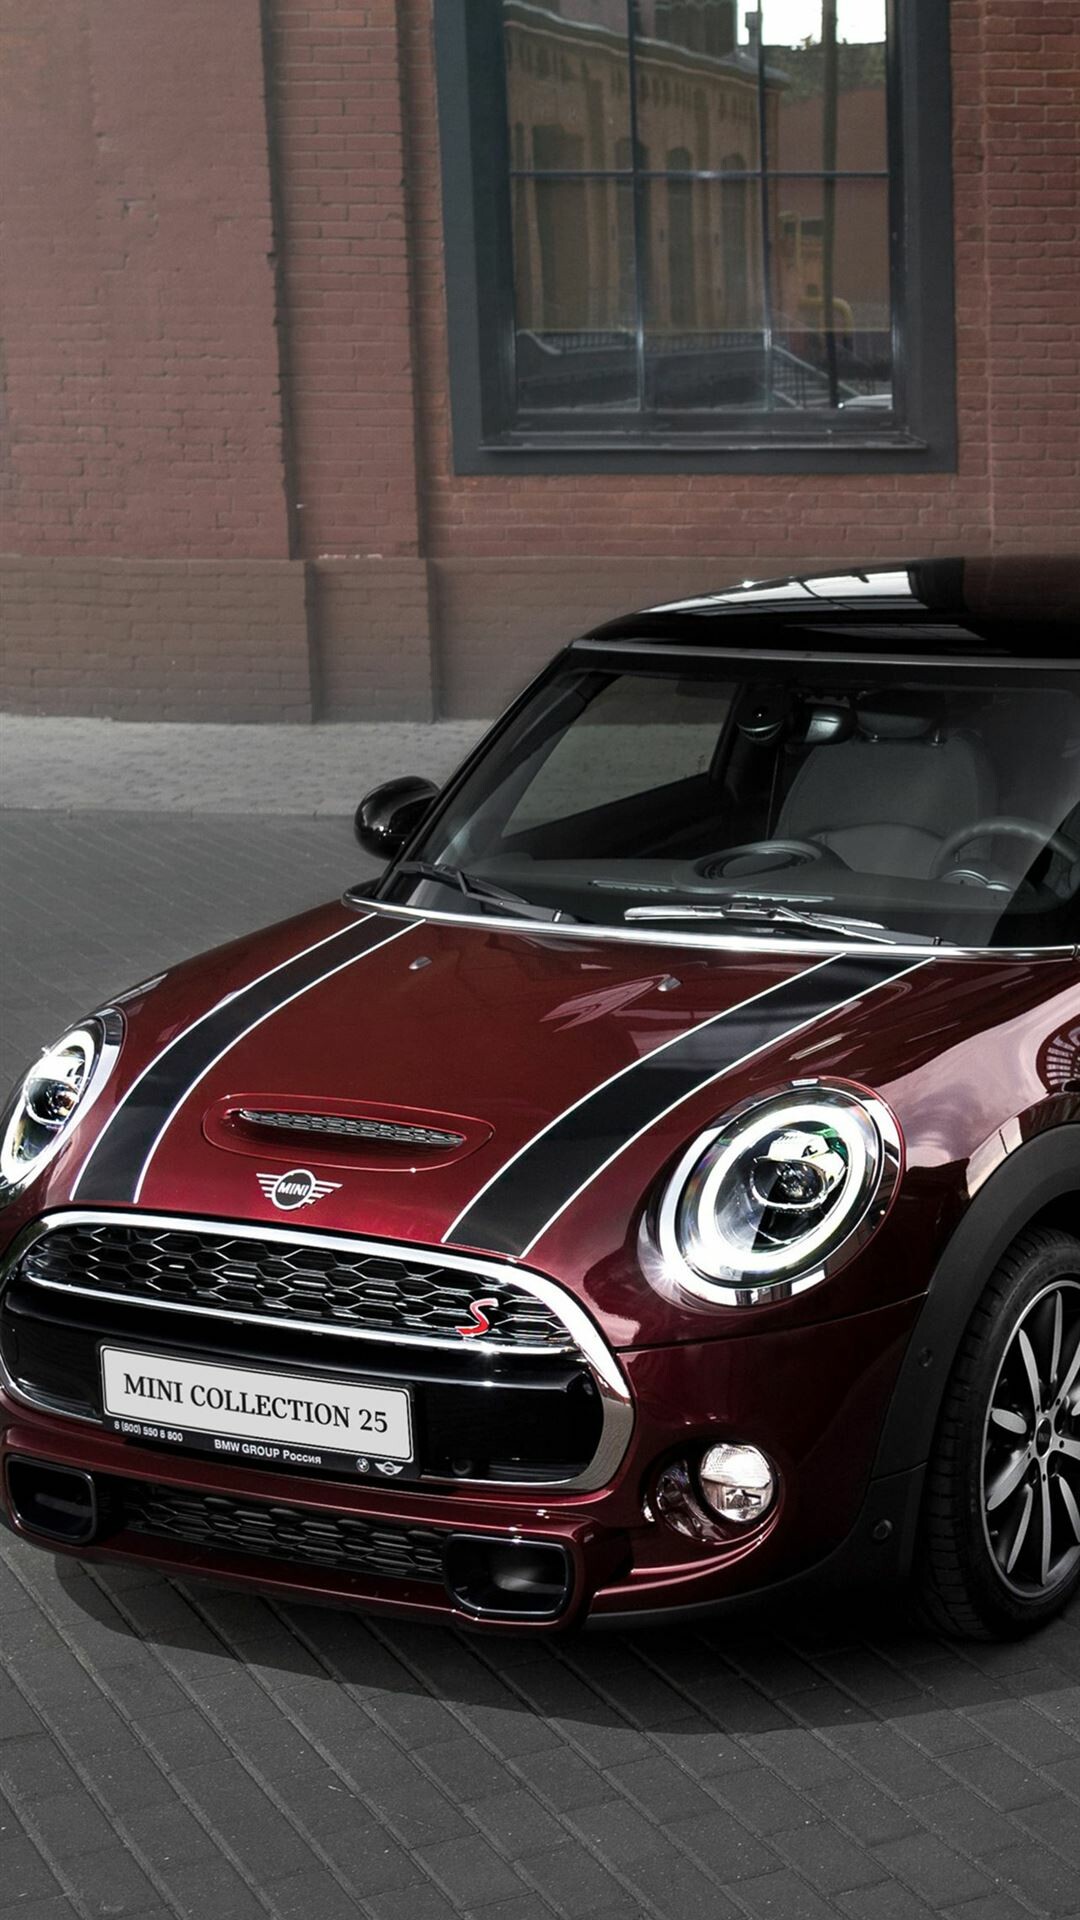 MINI Cooper: Countryman became the first five-door model to be launched in the BMW-era. 1080x1920 Full HD Wallpaper.